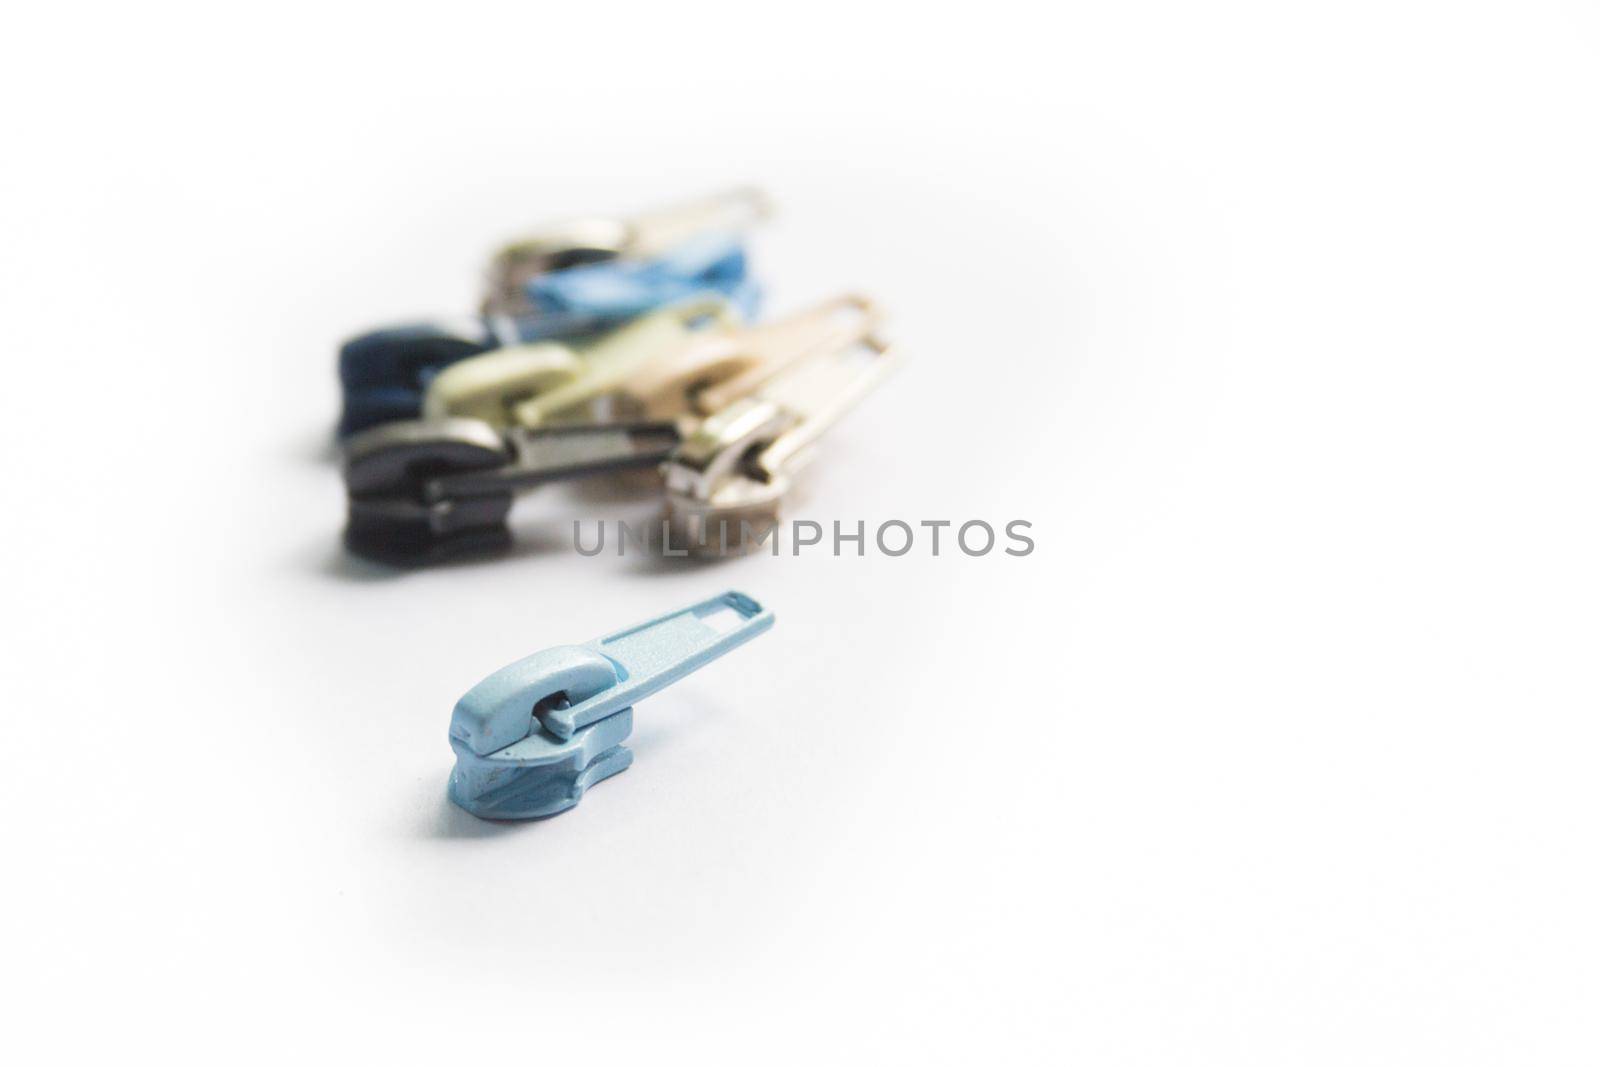 Zipper puller collection isolated on white background by ingalinder